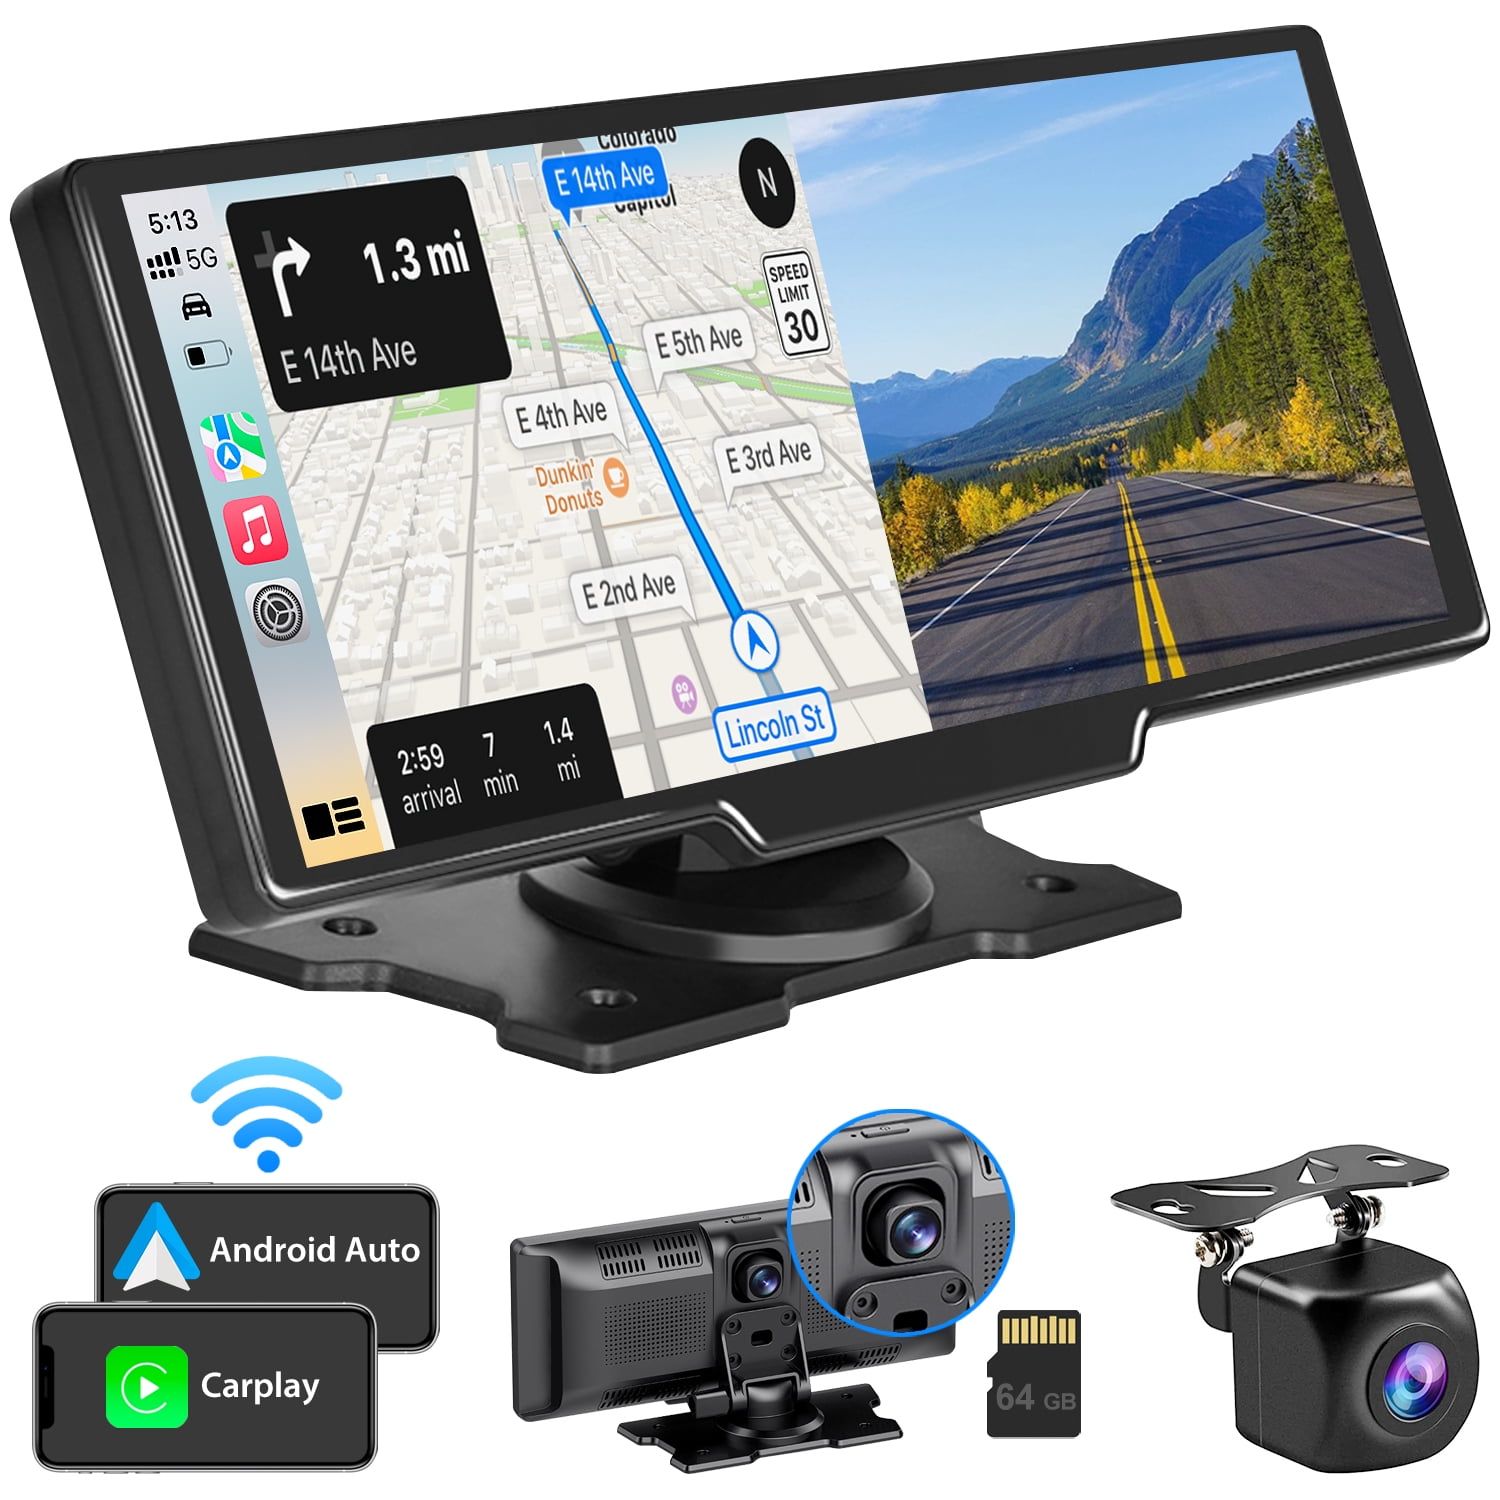 Lamtto 9.26 inch Wireless Car Stereo Apple CarPlay with 2K Dash Cam, 1080p Backup Camera, Portable Touchscreen GPS Navigation for Car, Car Stereo